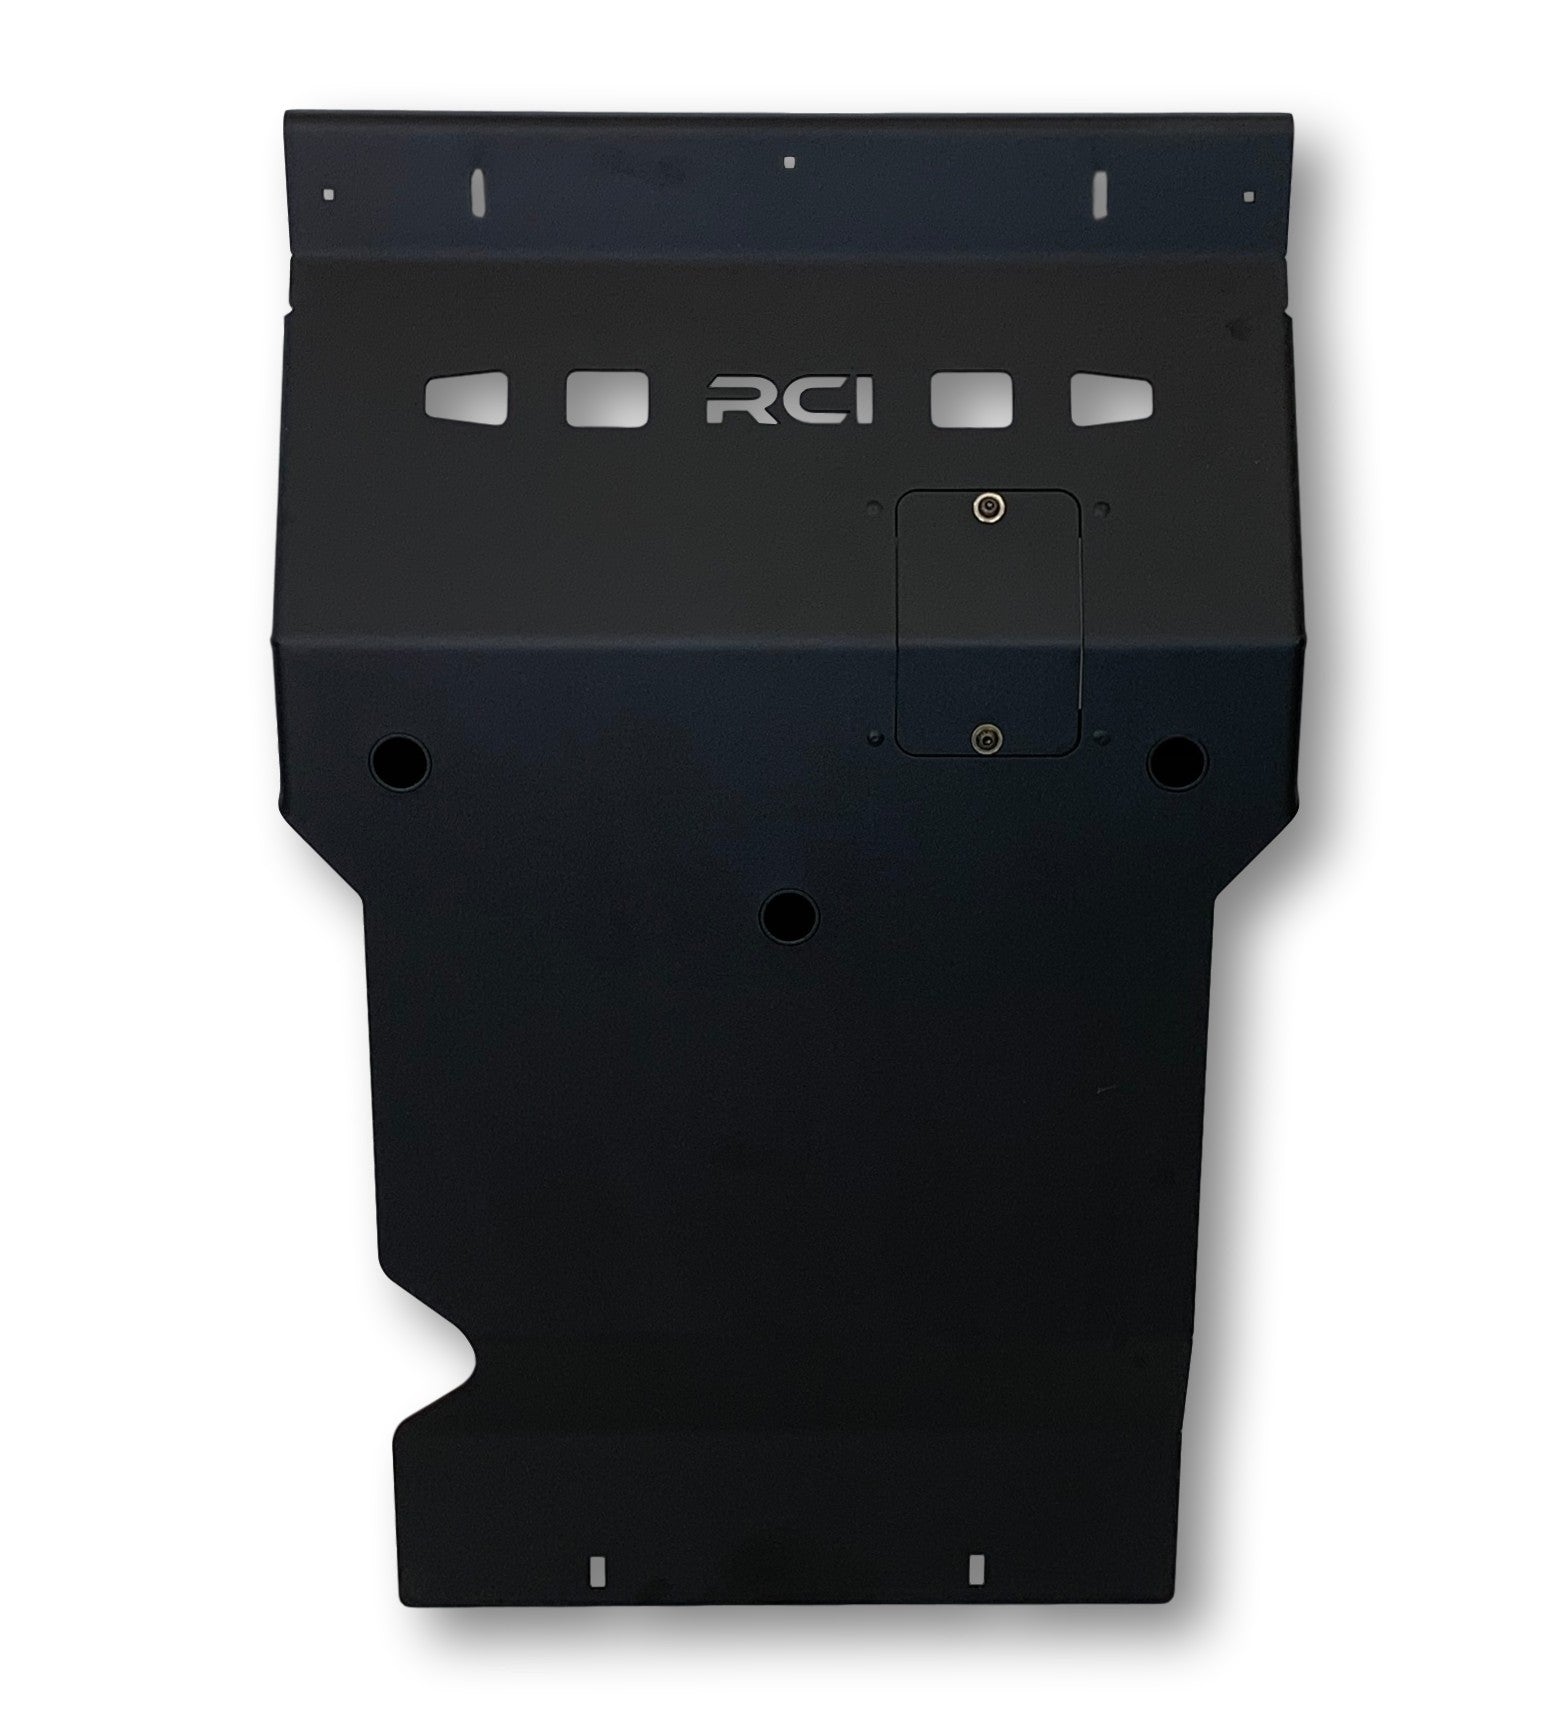 '22-23 Toyota Tundra RCI Off-Road Skid Plate Package (bottom view)